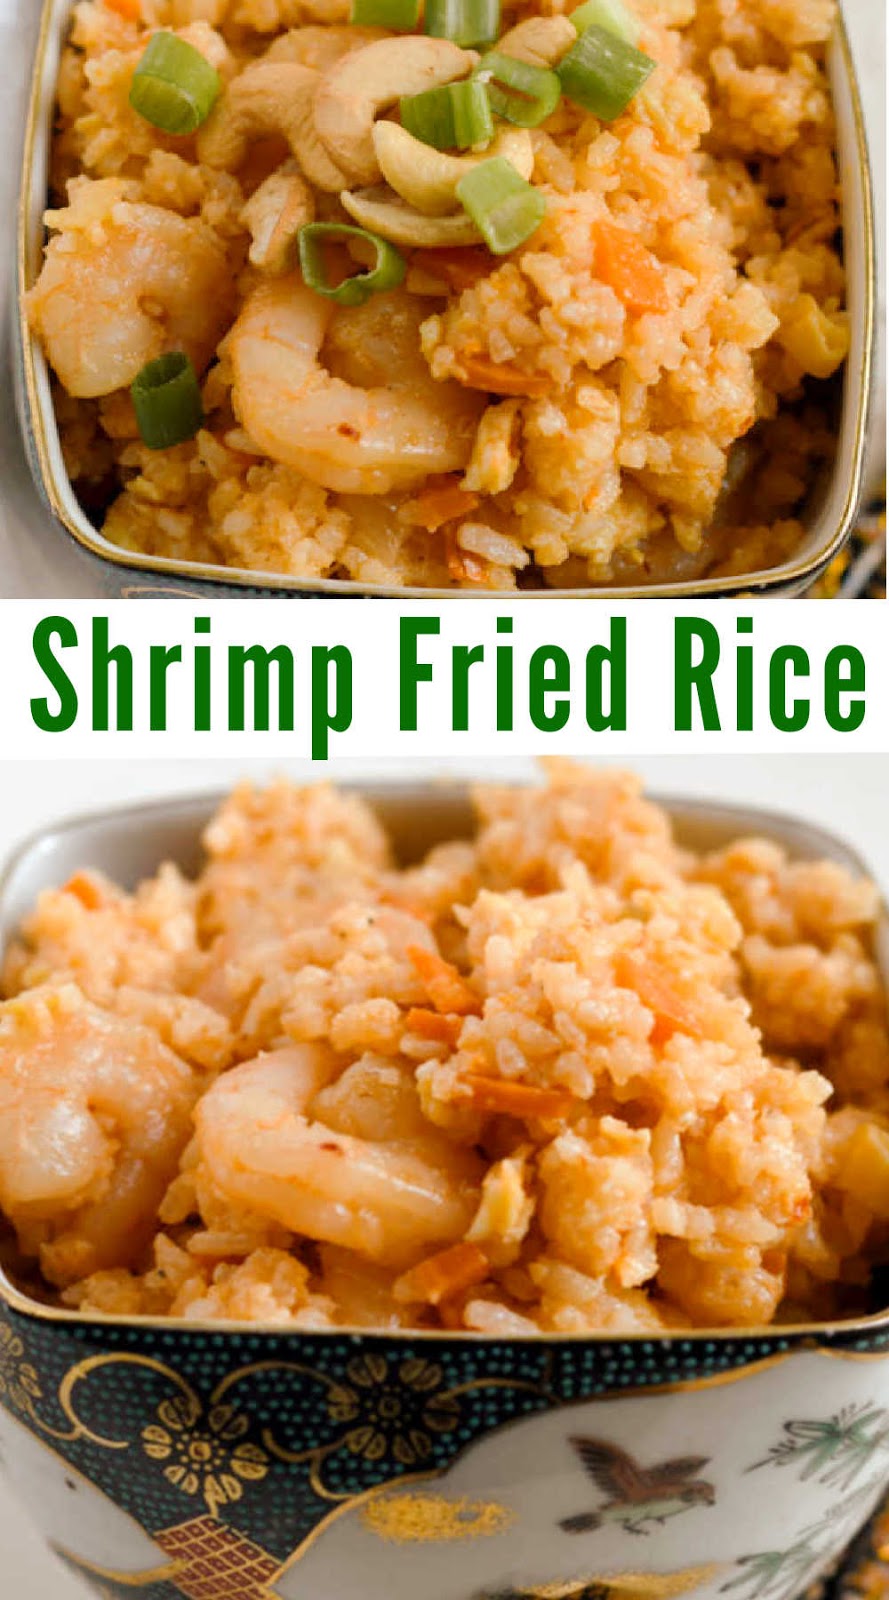 Cooking With Carlee: Shrimp Fried Rice